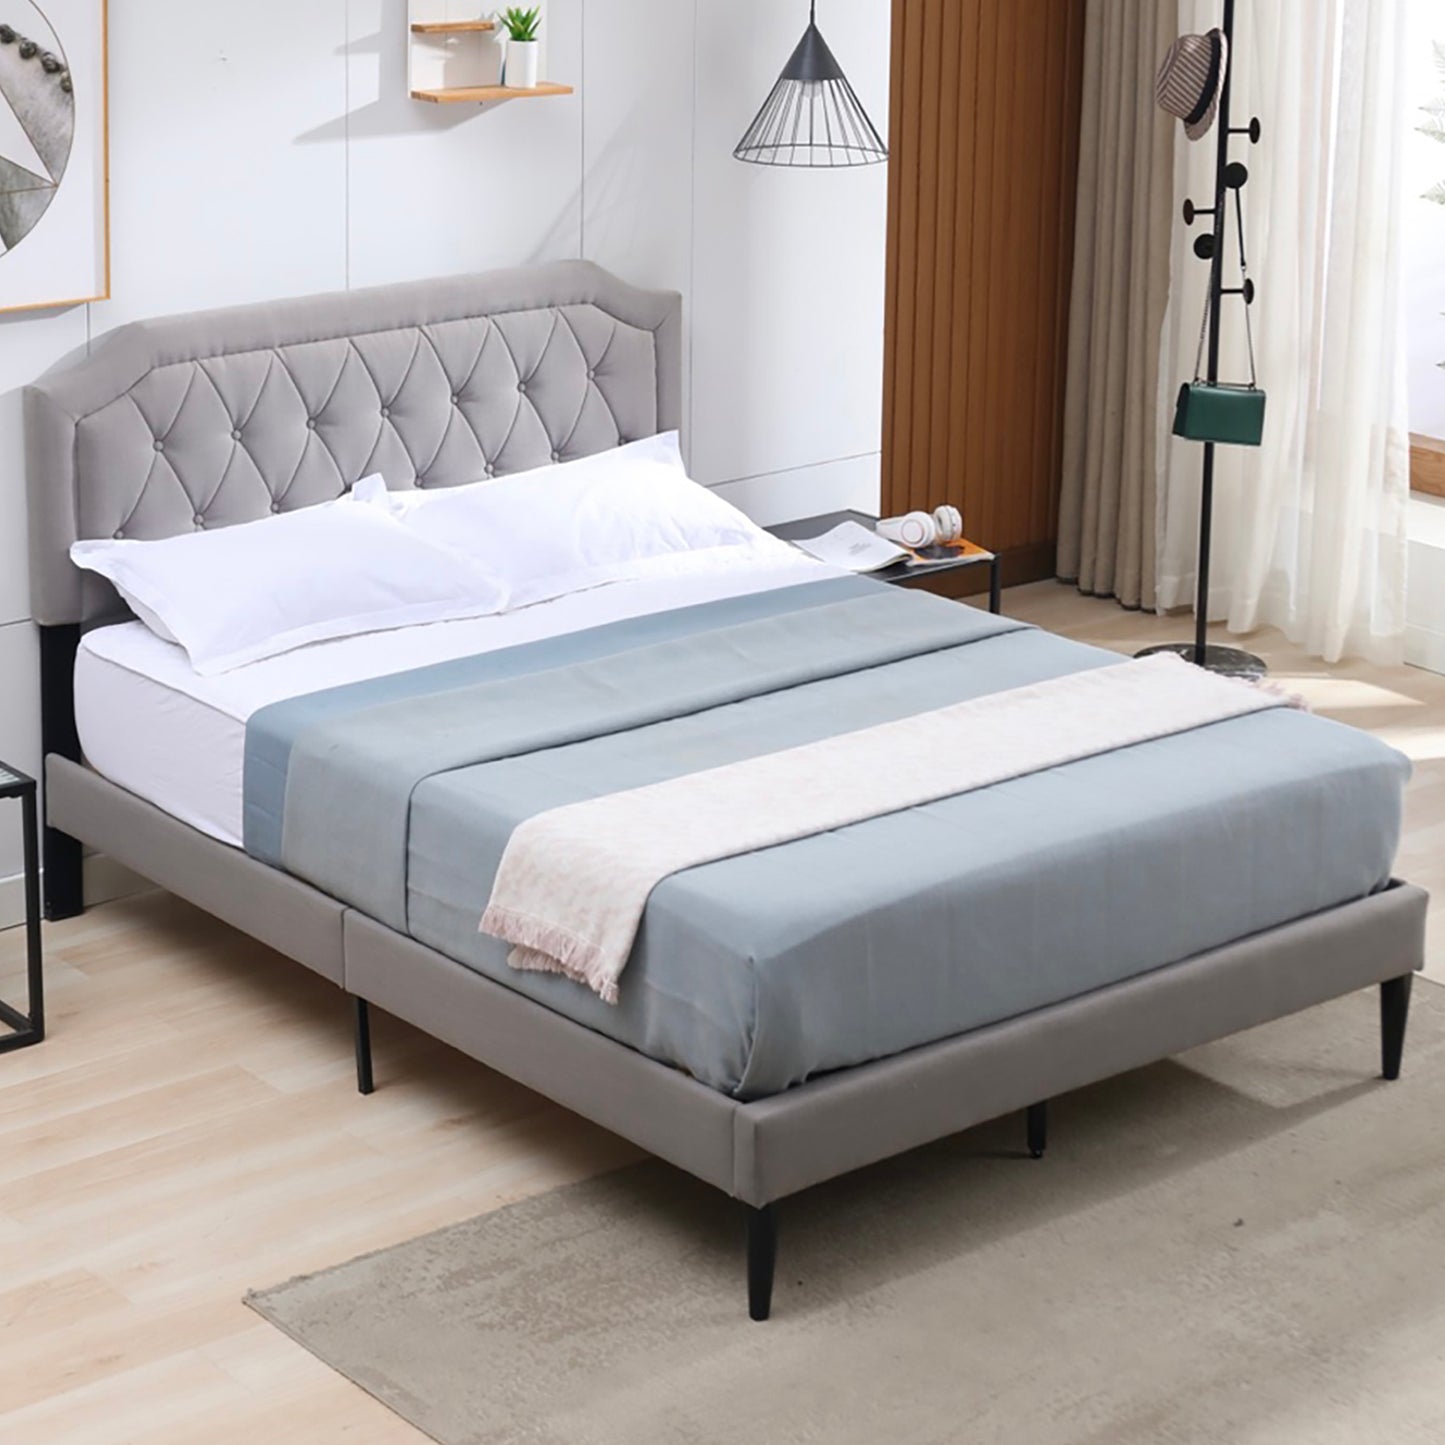 SYNGAR Full Size Platform Bed Frame with Linen Fabric Upholstered Button Tufted Headboard, Sturdy Sturdy Frame and Strong Wooden Slats, No Box Spring Needed, Gray